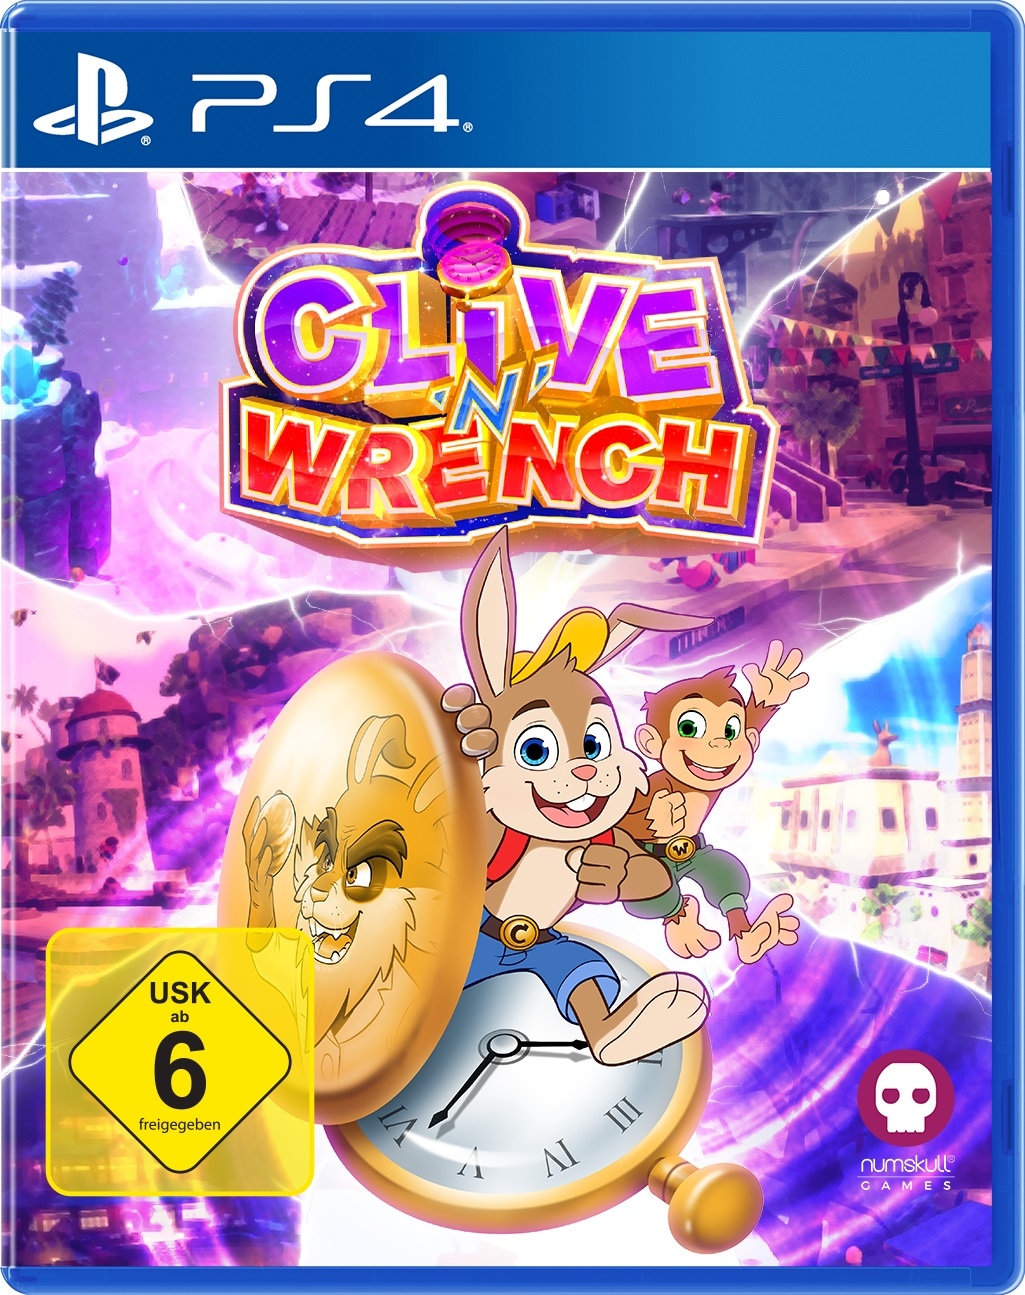 Spielesoftware »Clive n Wrench«, PlayStation 4